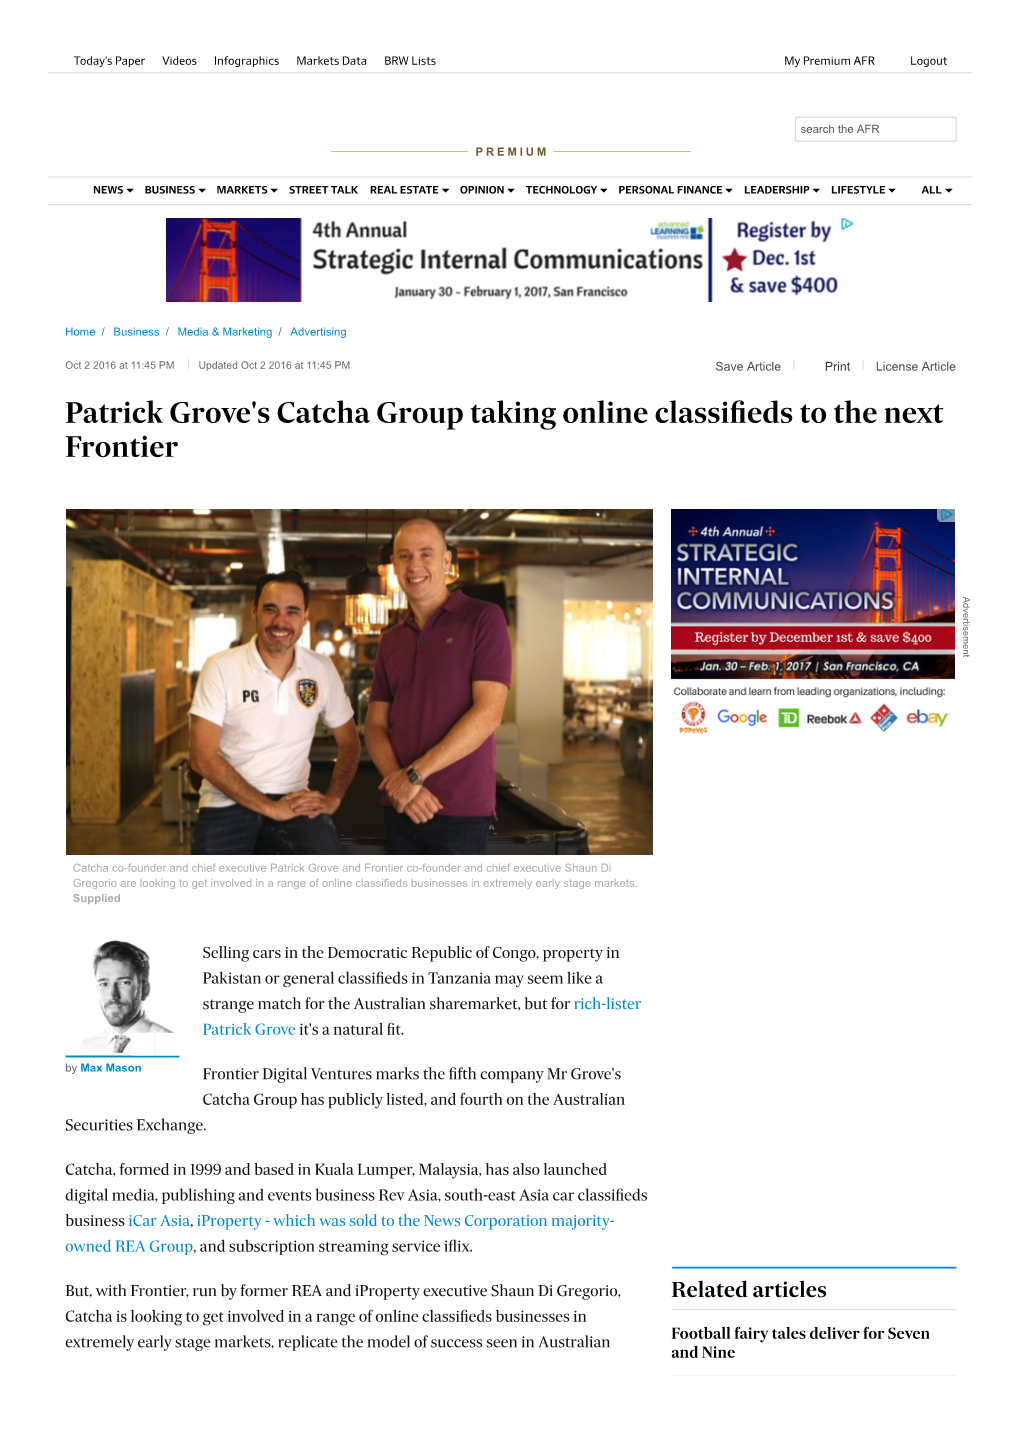 Patrick Grove's Catcha Group Taking Online Classifieds to the Next Frontier